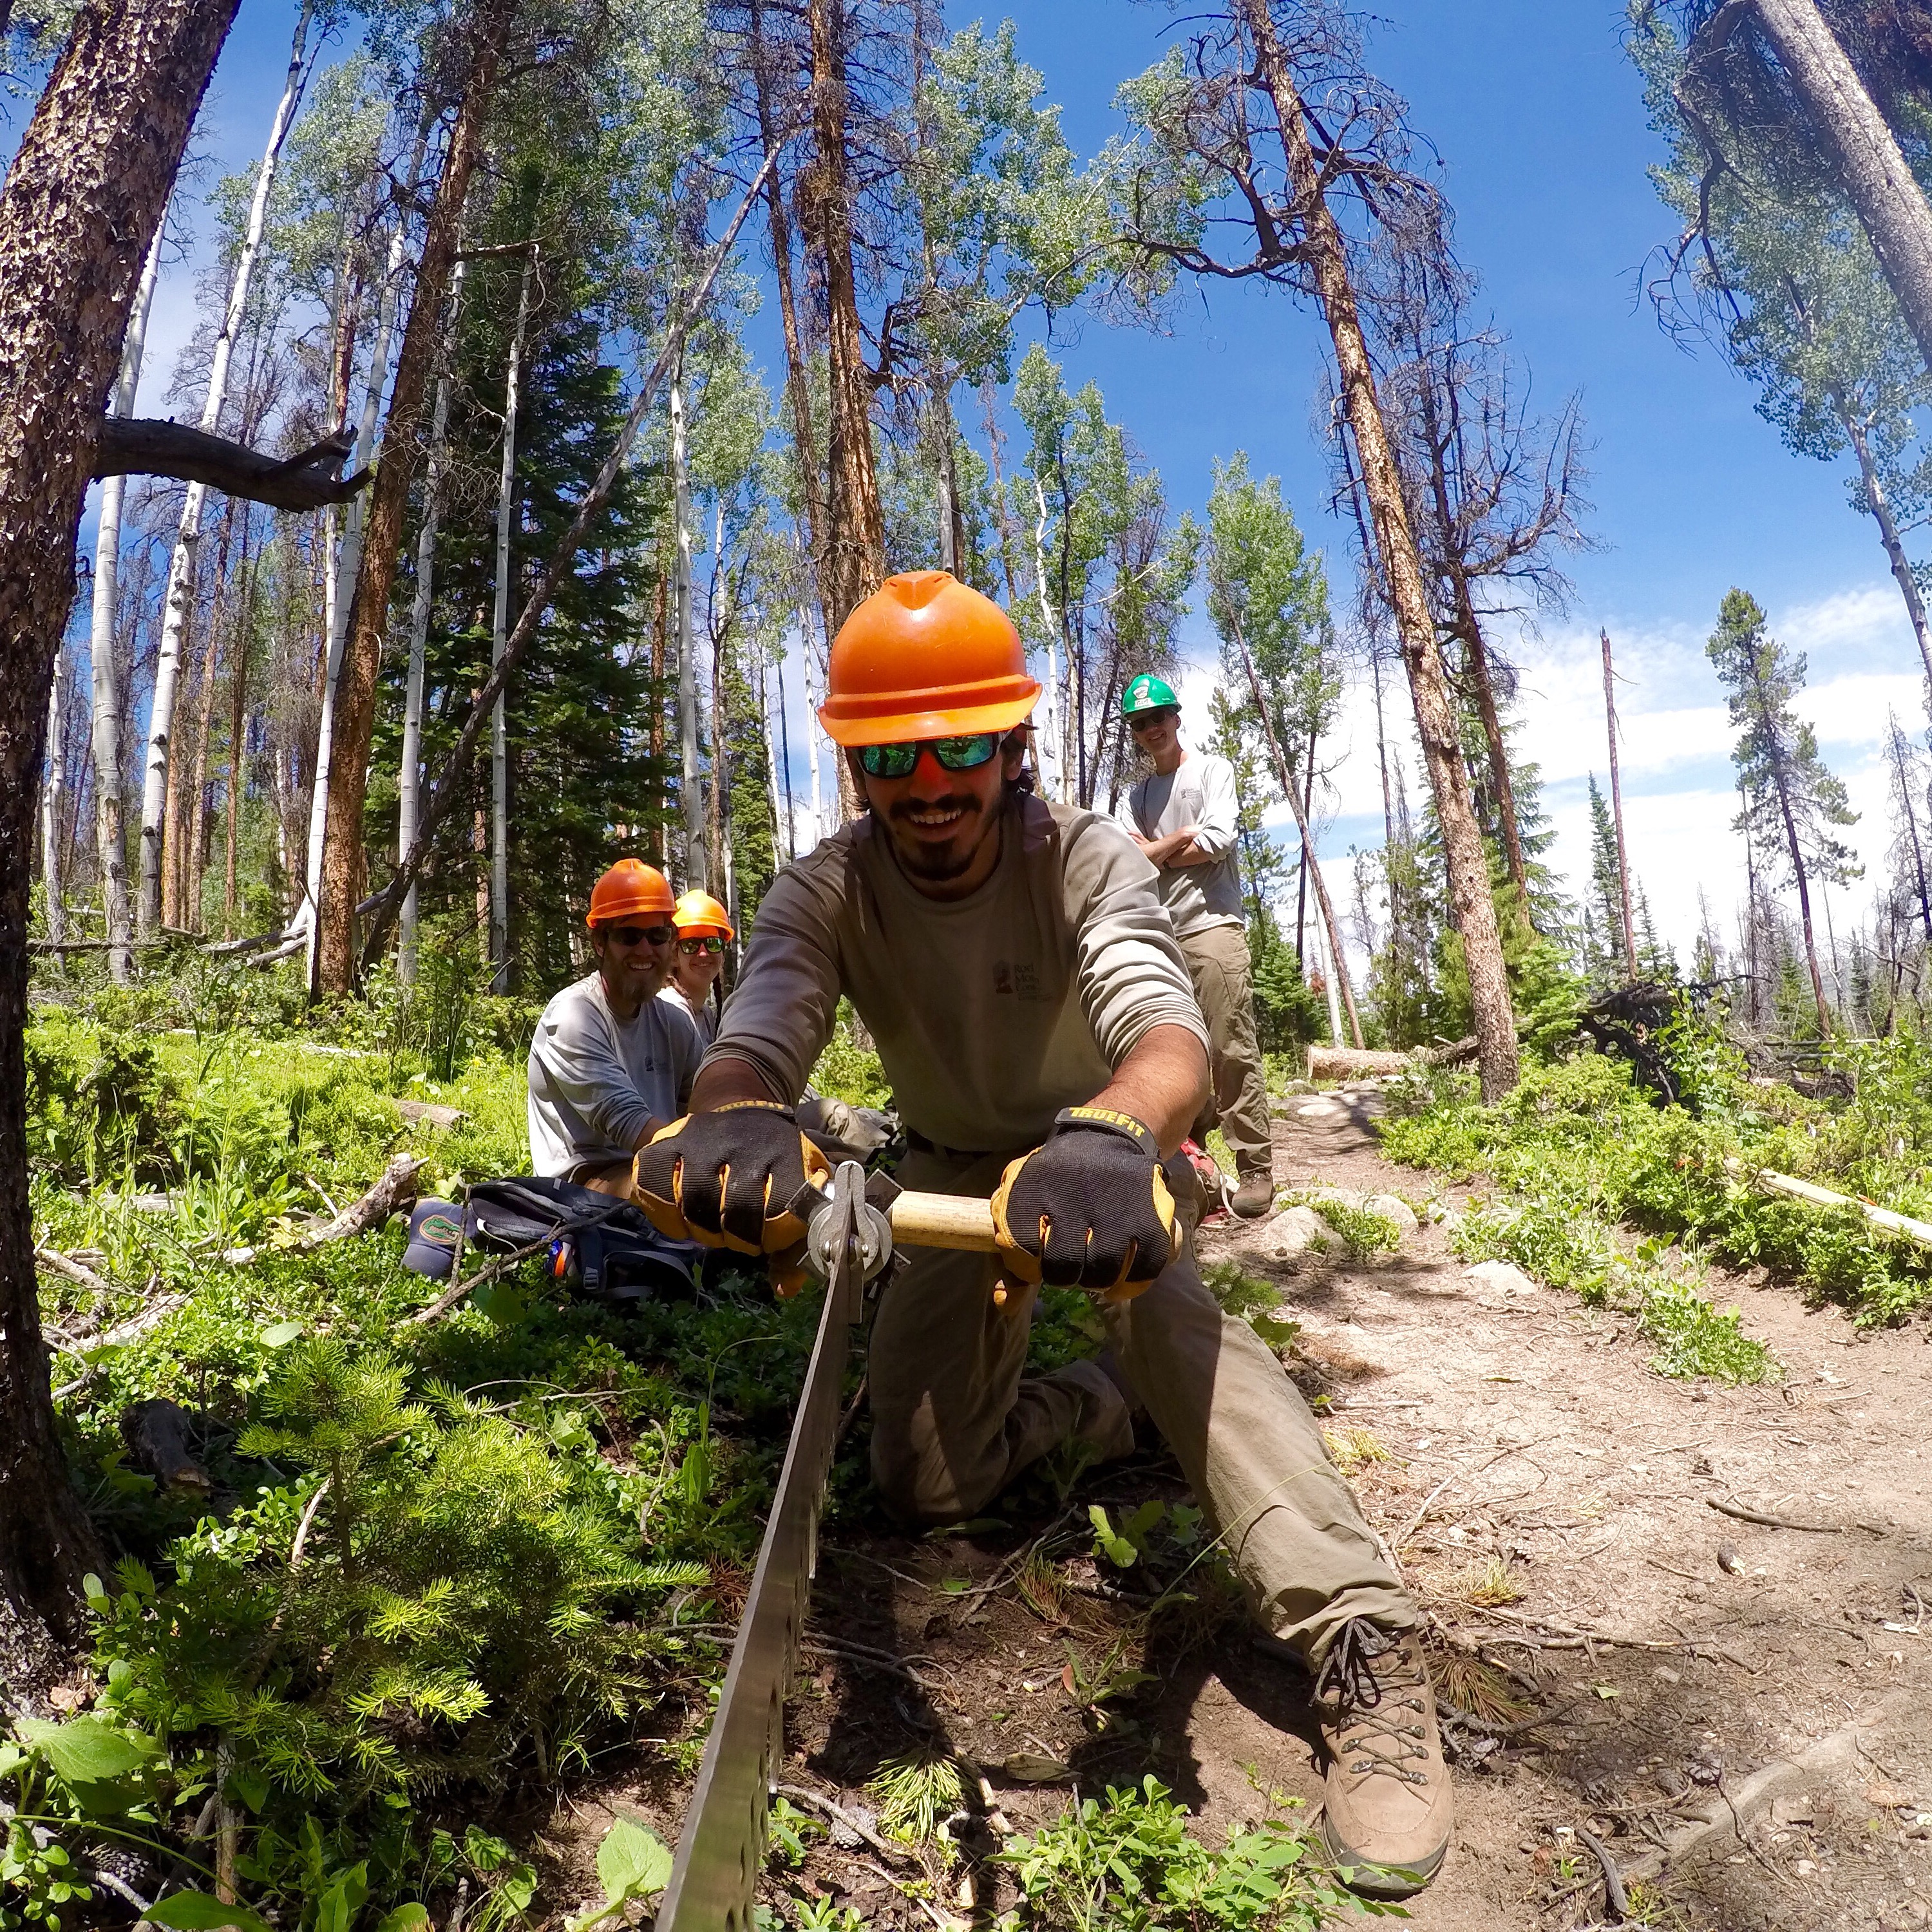 One of my favorite parts of doing trail work is cross cutting fallen trees off the trail. This moment was captured on the McIntyre trail in the Rawah Wilderness.